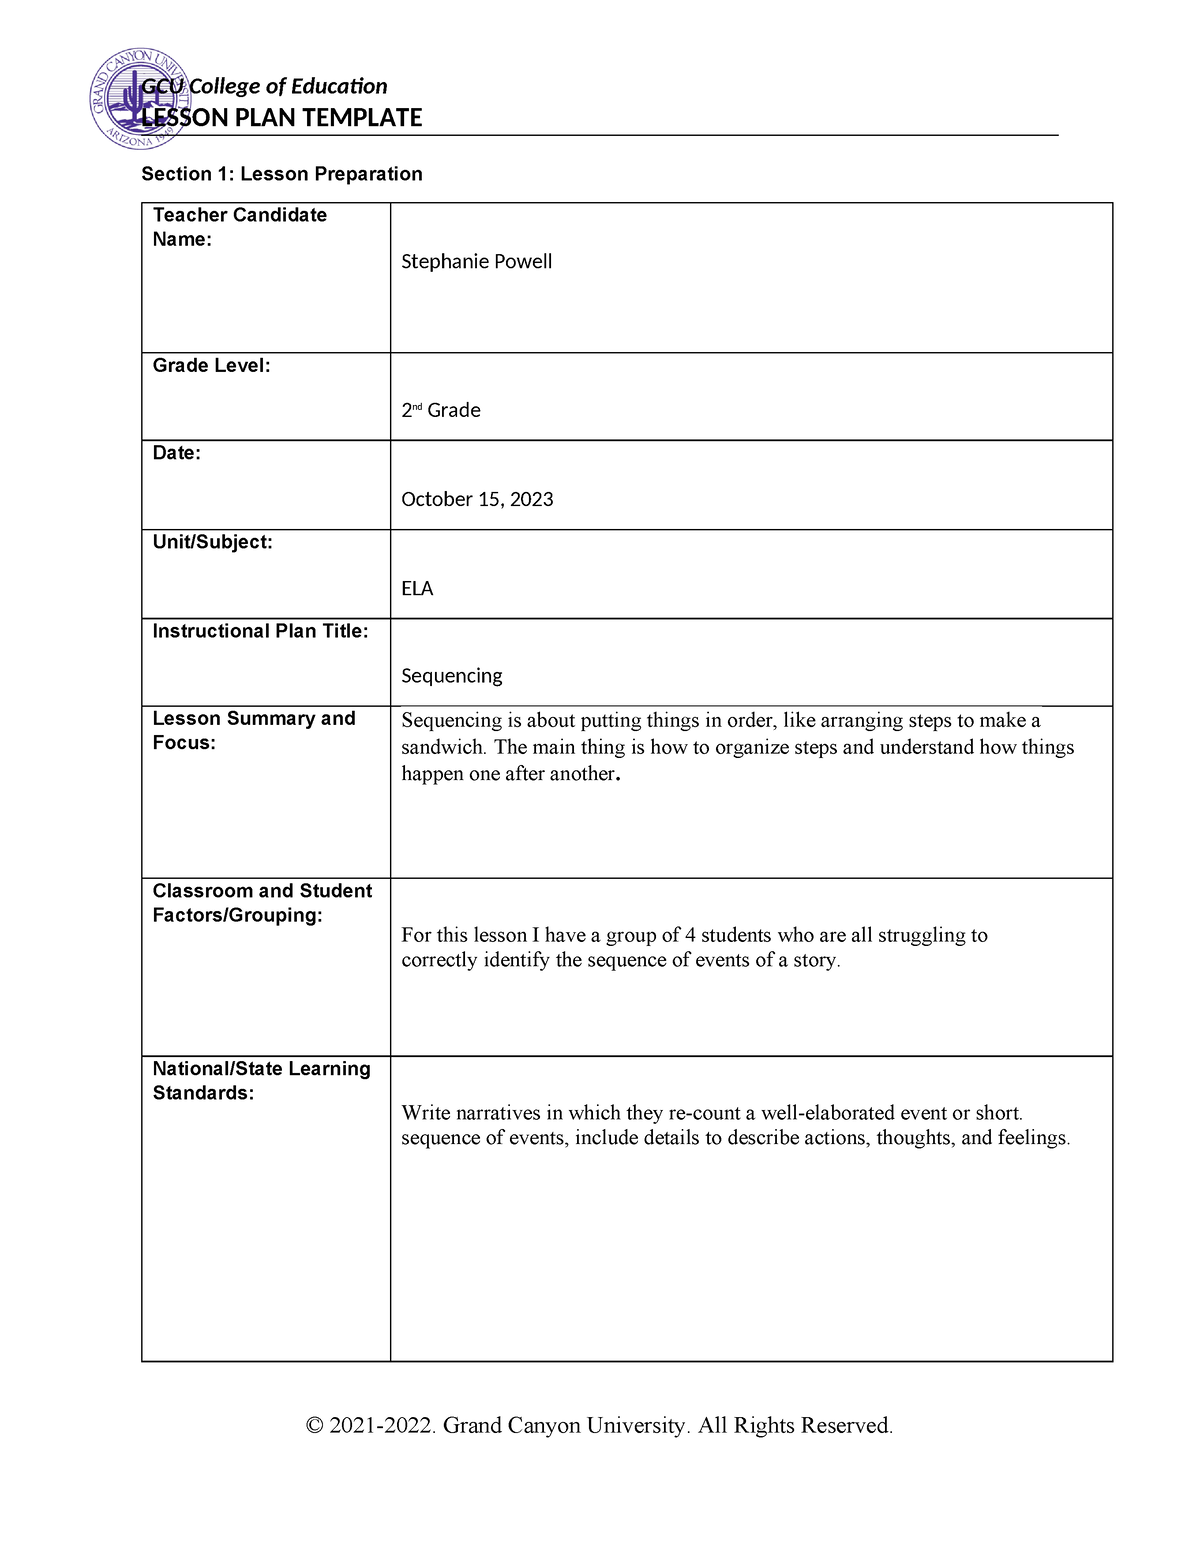 Coe-lesson-plan-template - LESSON PLAN TEMPLATE Section 1: Lesson ...